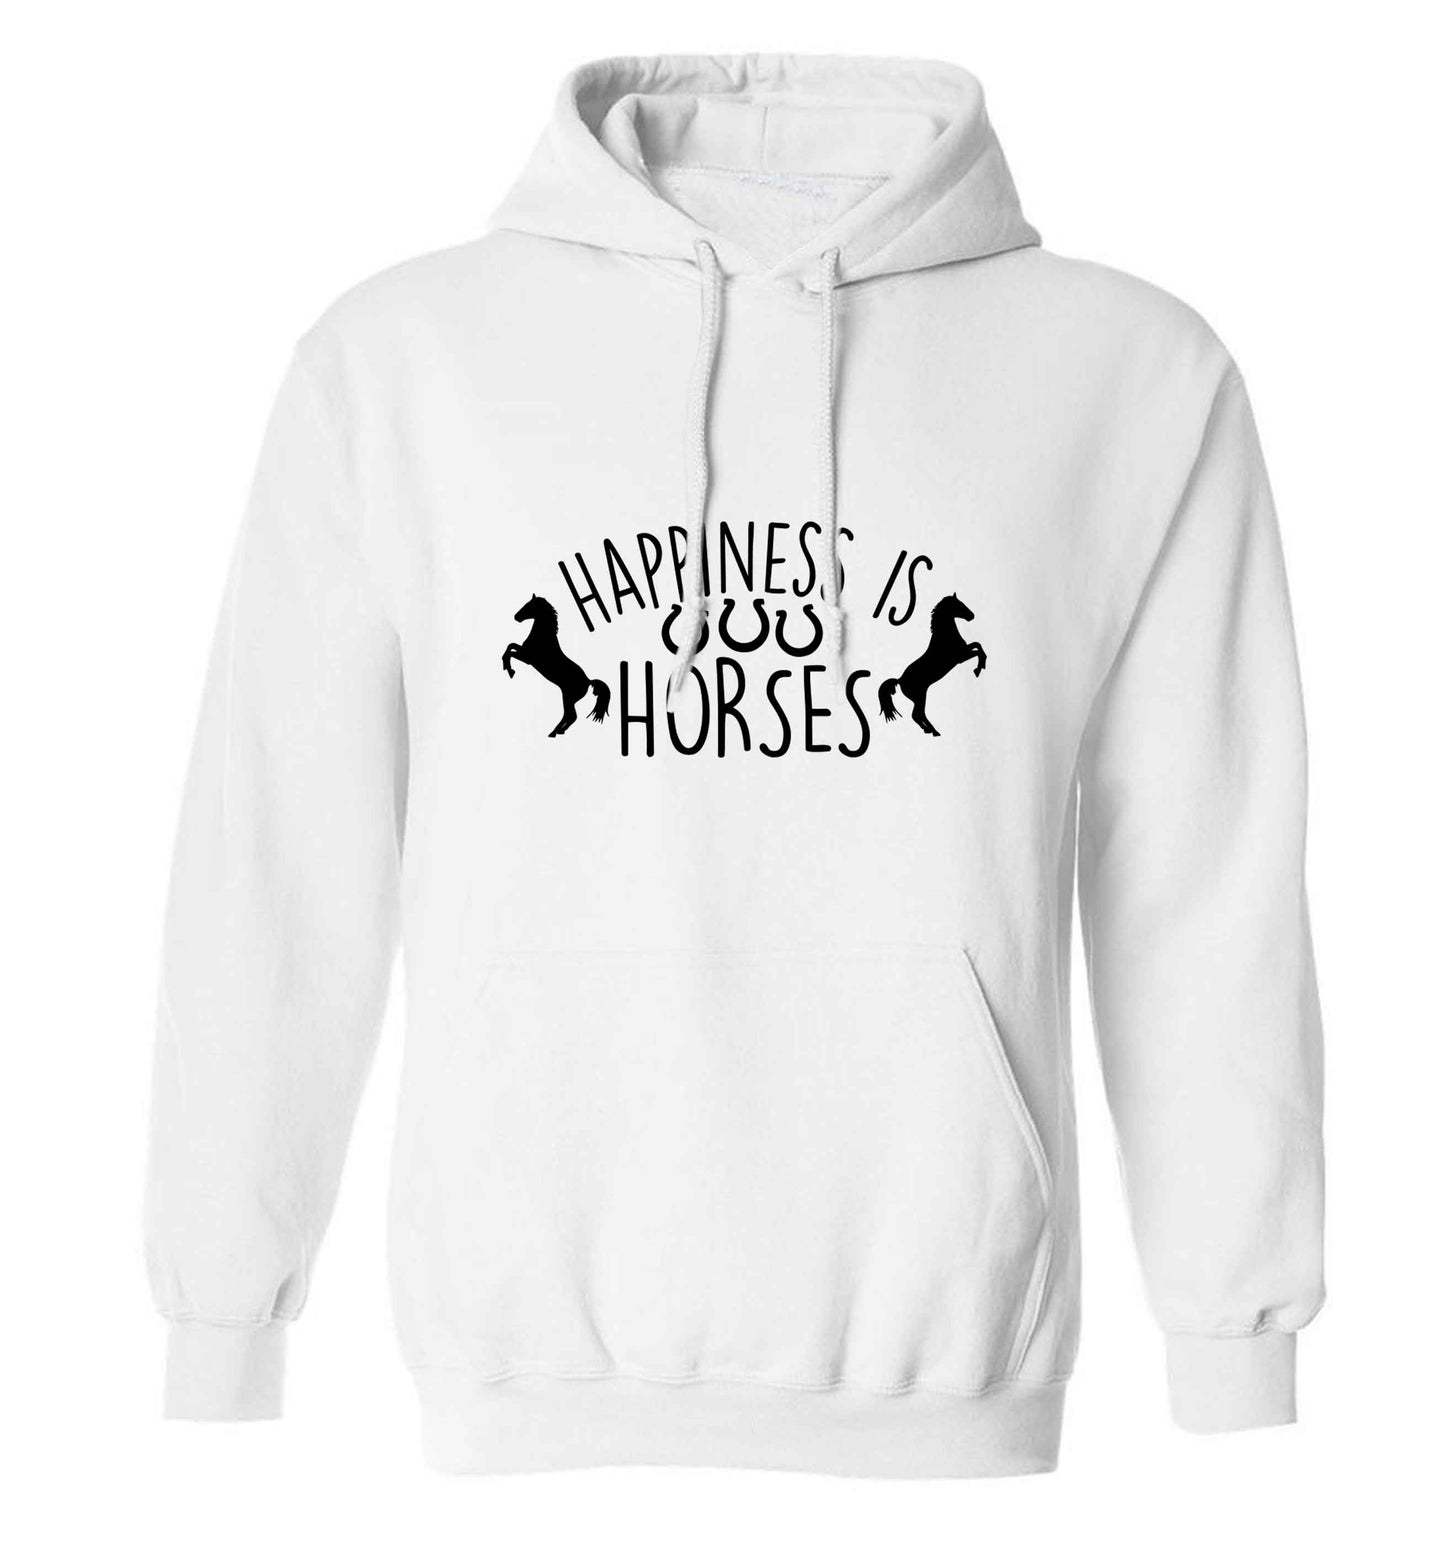 Happiness is horses adults unisex white hoodie 2XL